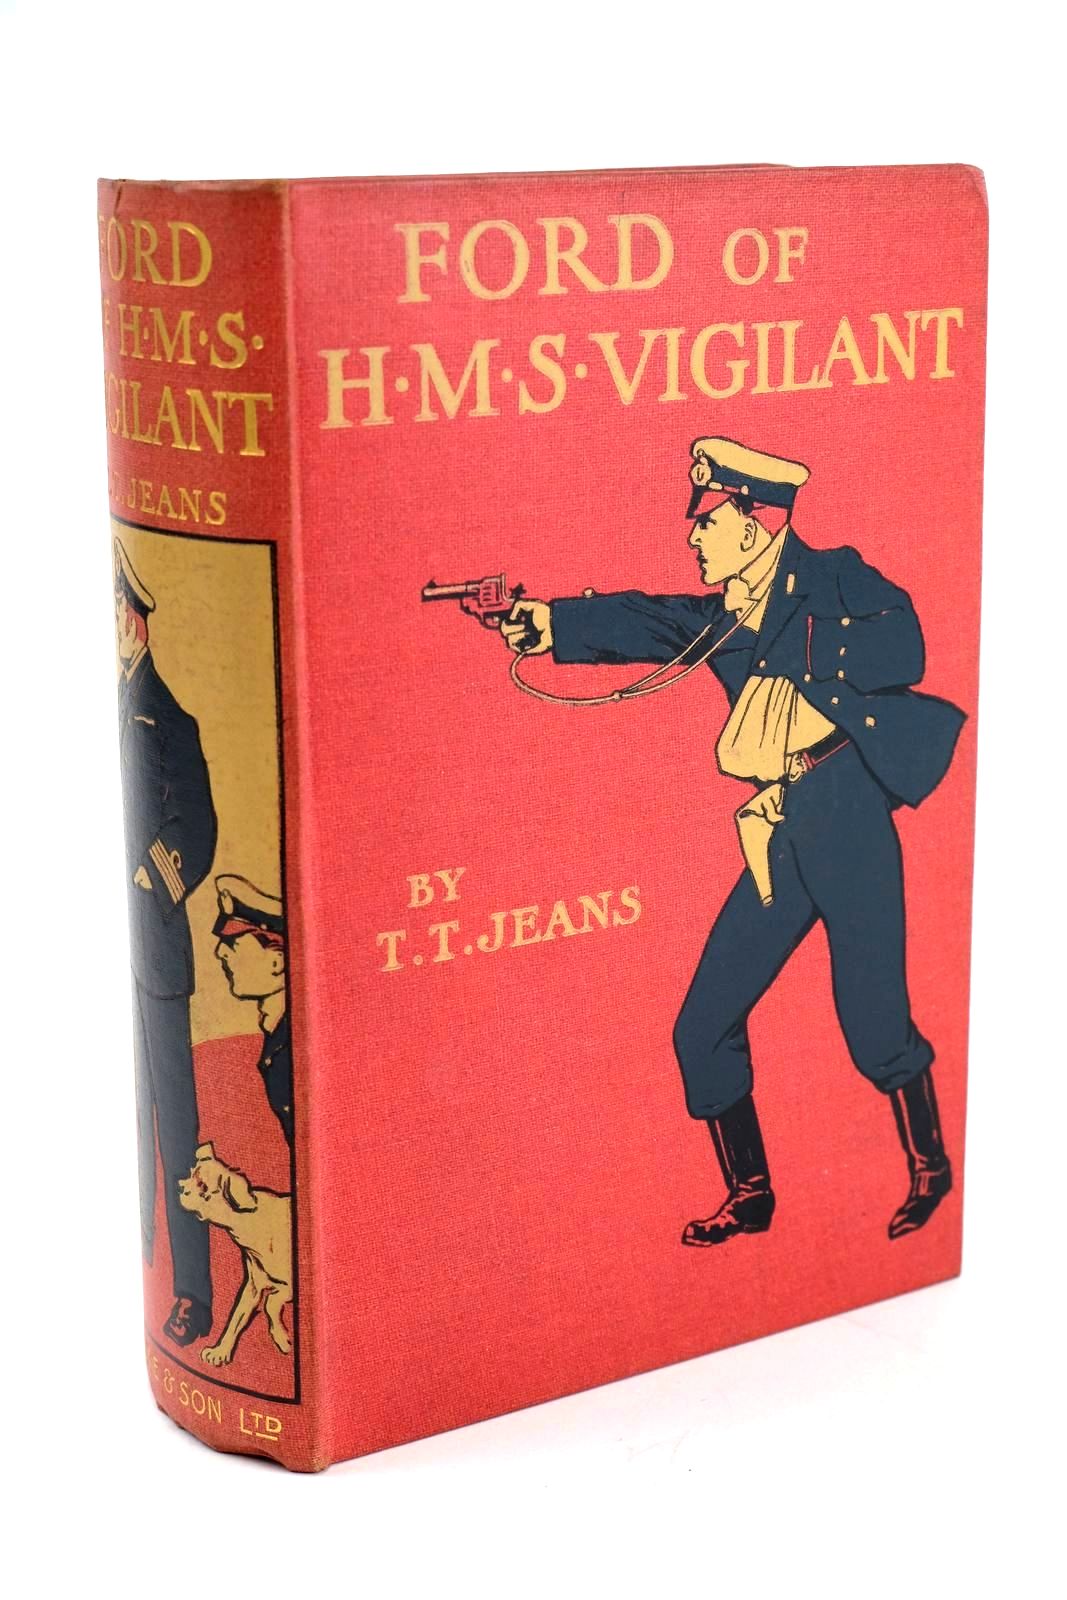 Photo of FORD OF H.M.S. VIGILANT written by Jeans, T.T. illustrated by Rainey, William published by Blackie &amp; Son Ltd. (STOCK CODE: 1324293)  for sale by Stella & Rose's Books